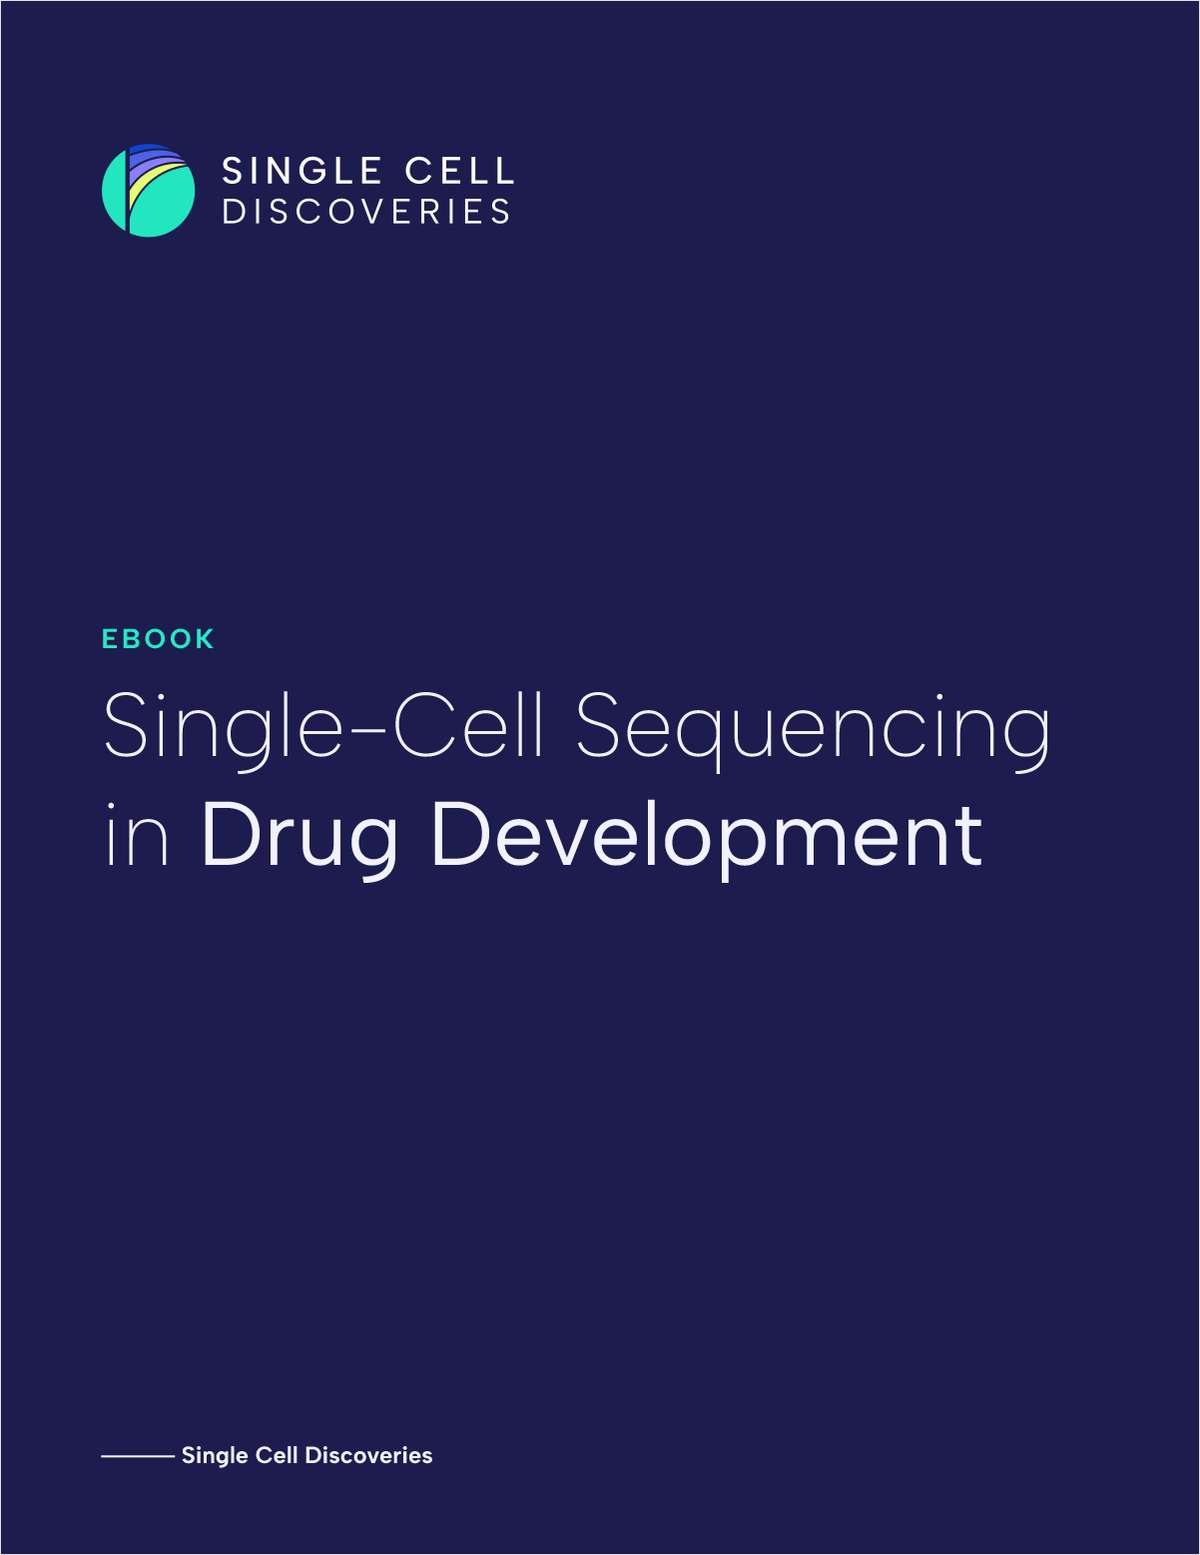 Single-Cell Sequencing in Drug Development